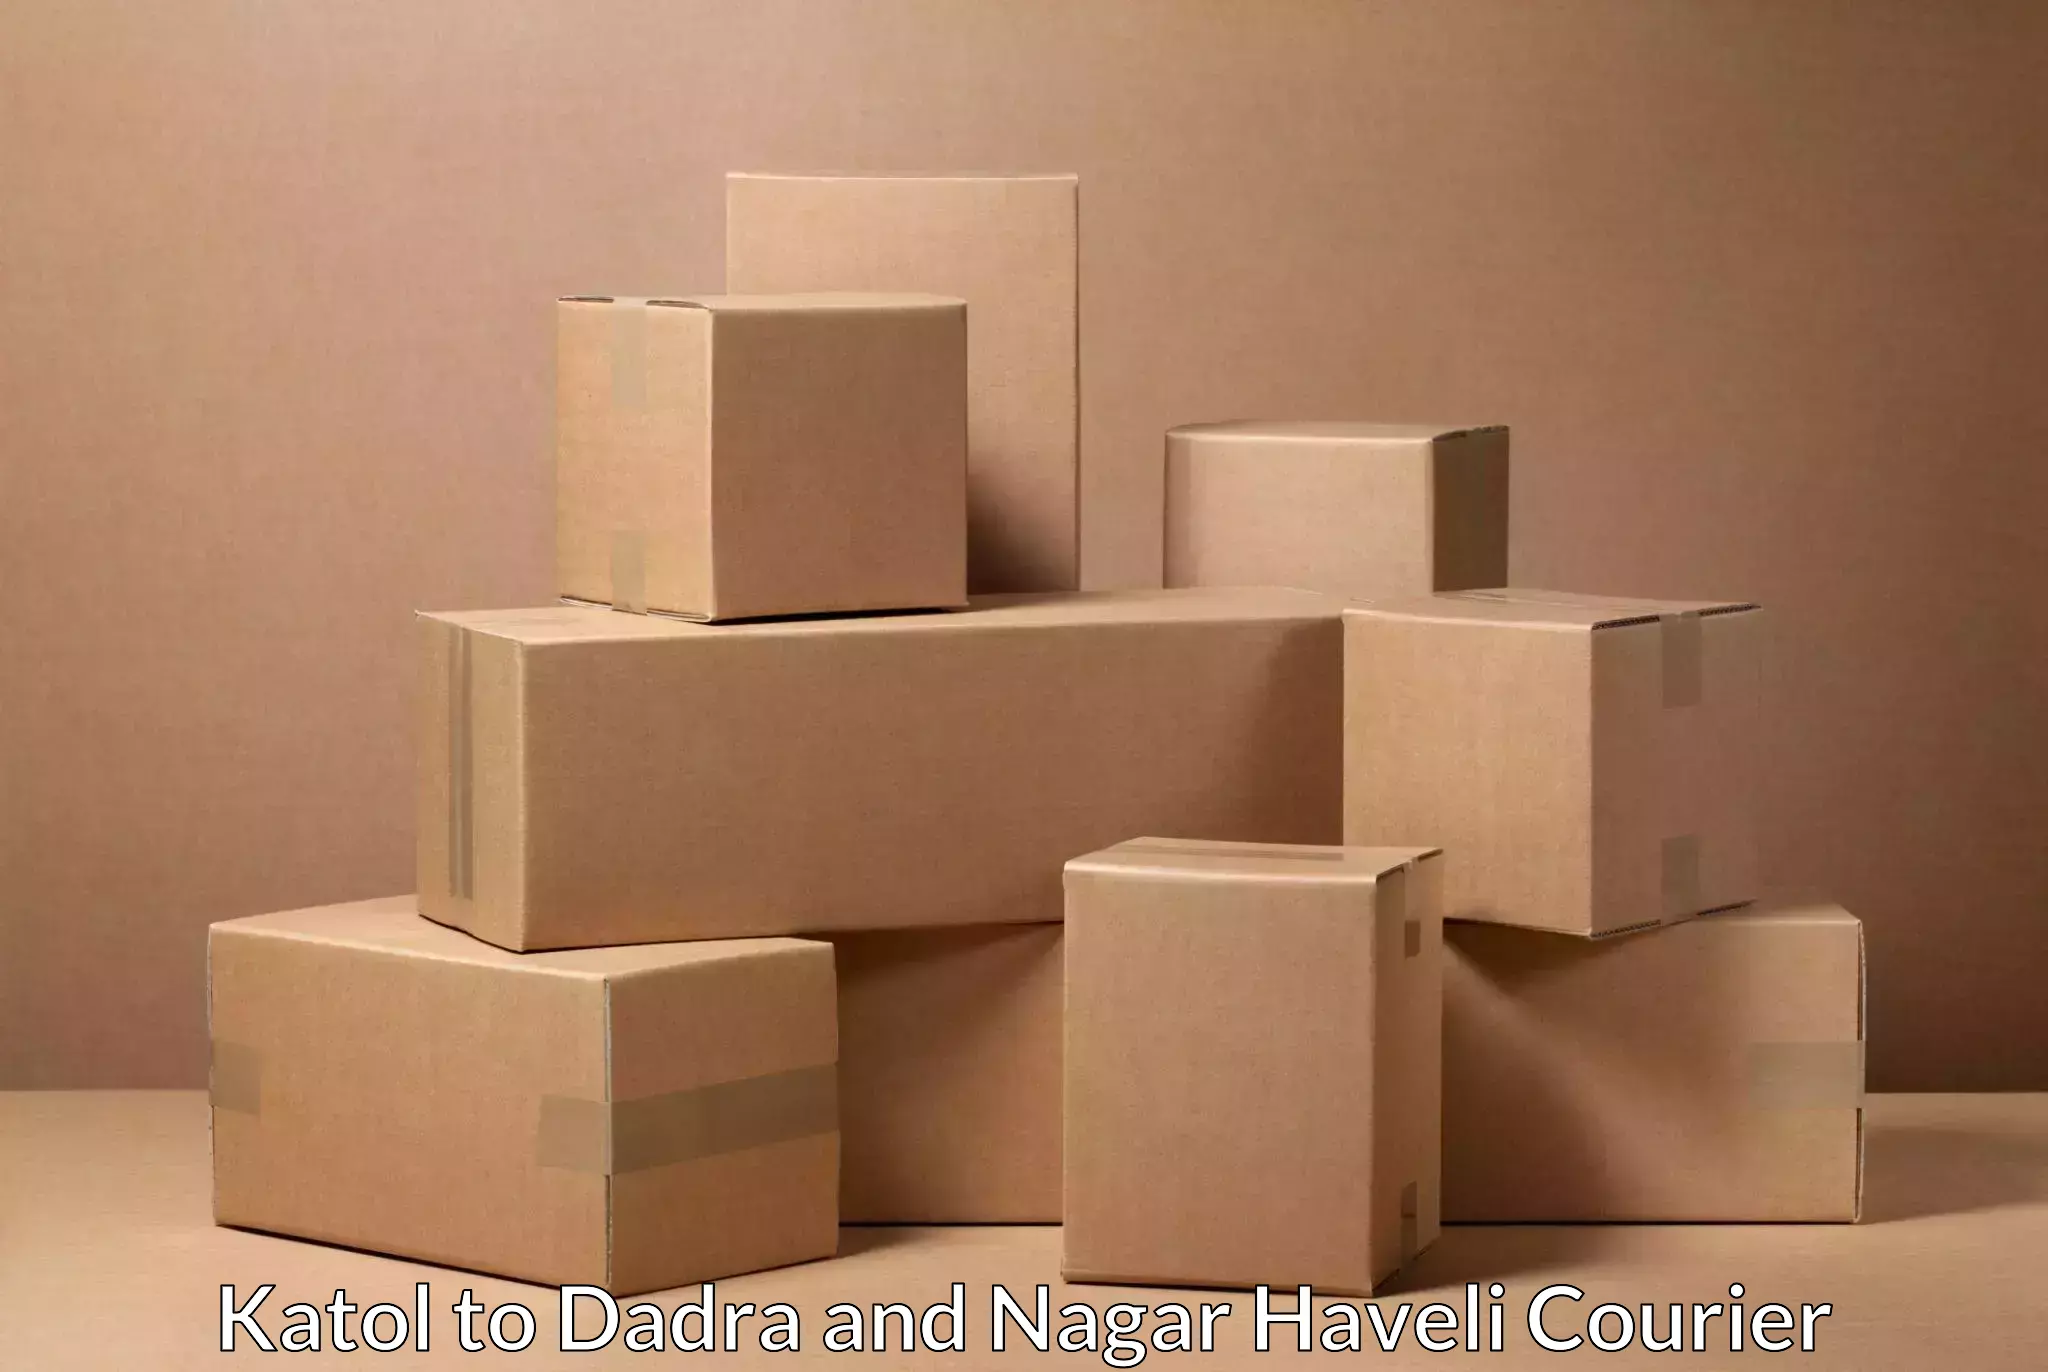 Residential courier service in Katol to Dadra and Nagar Haveli